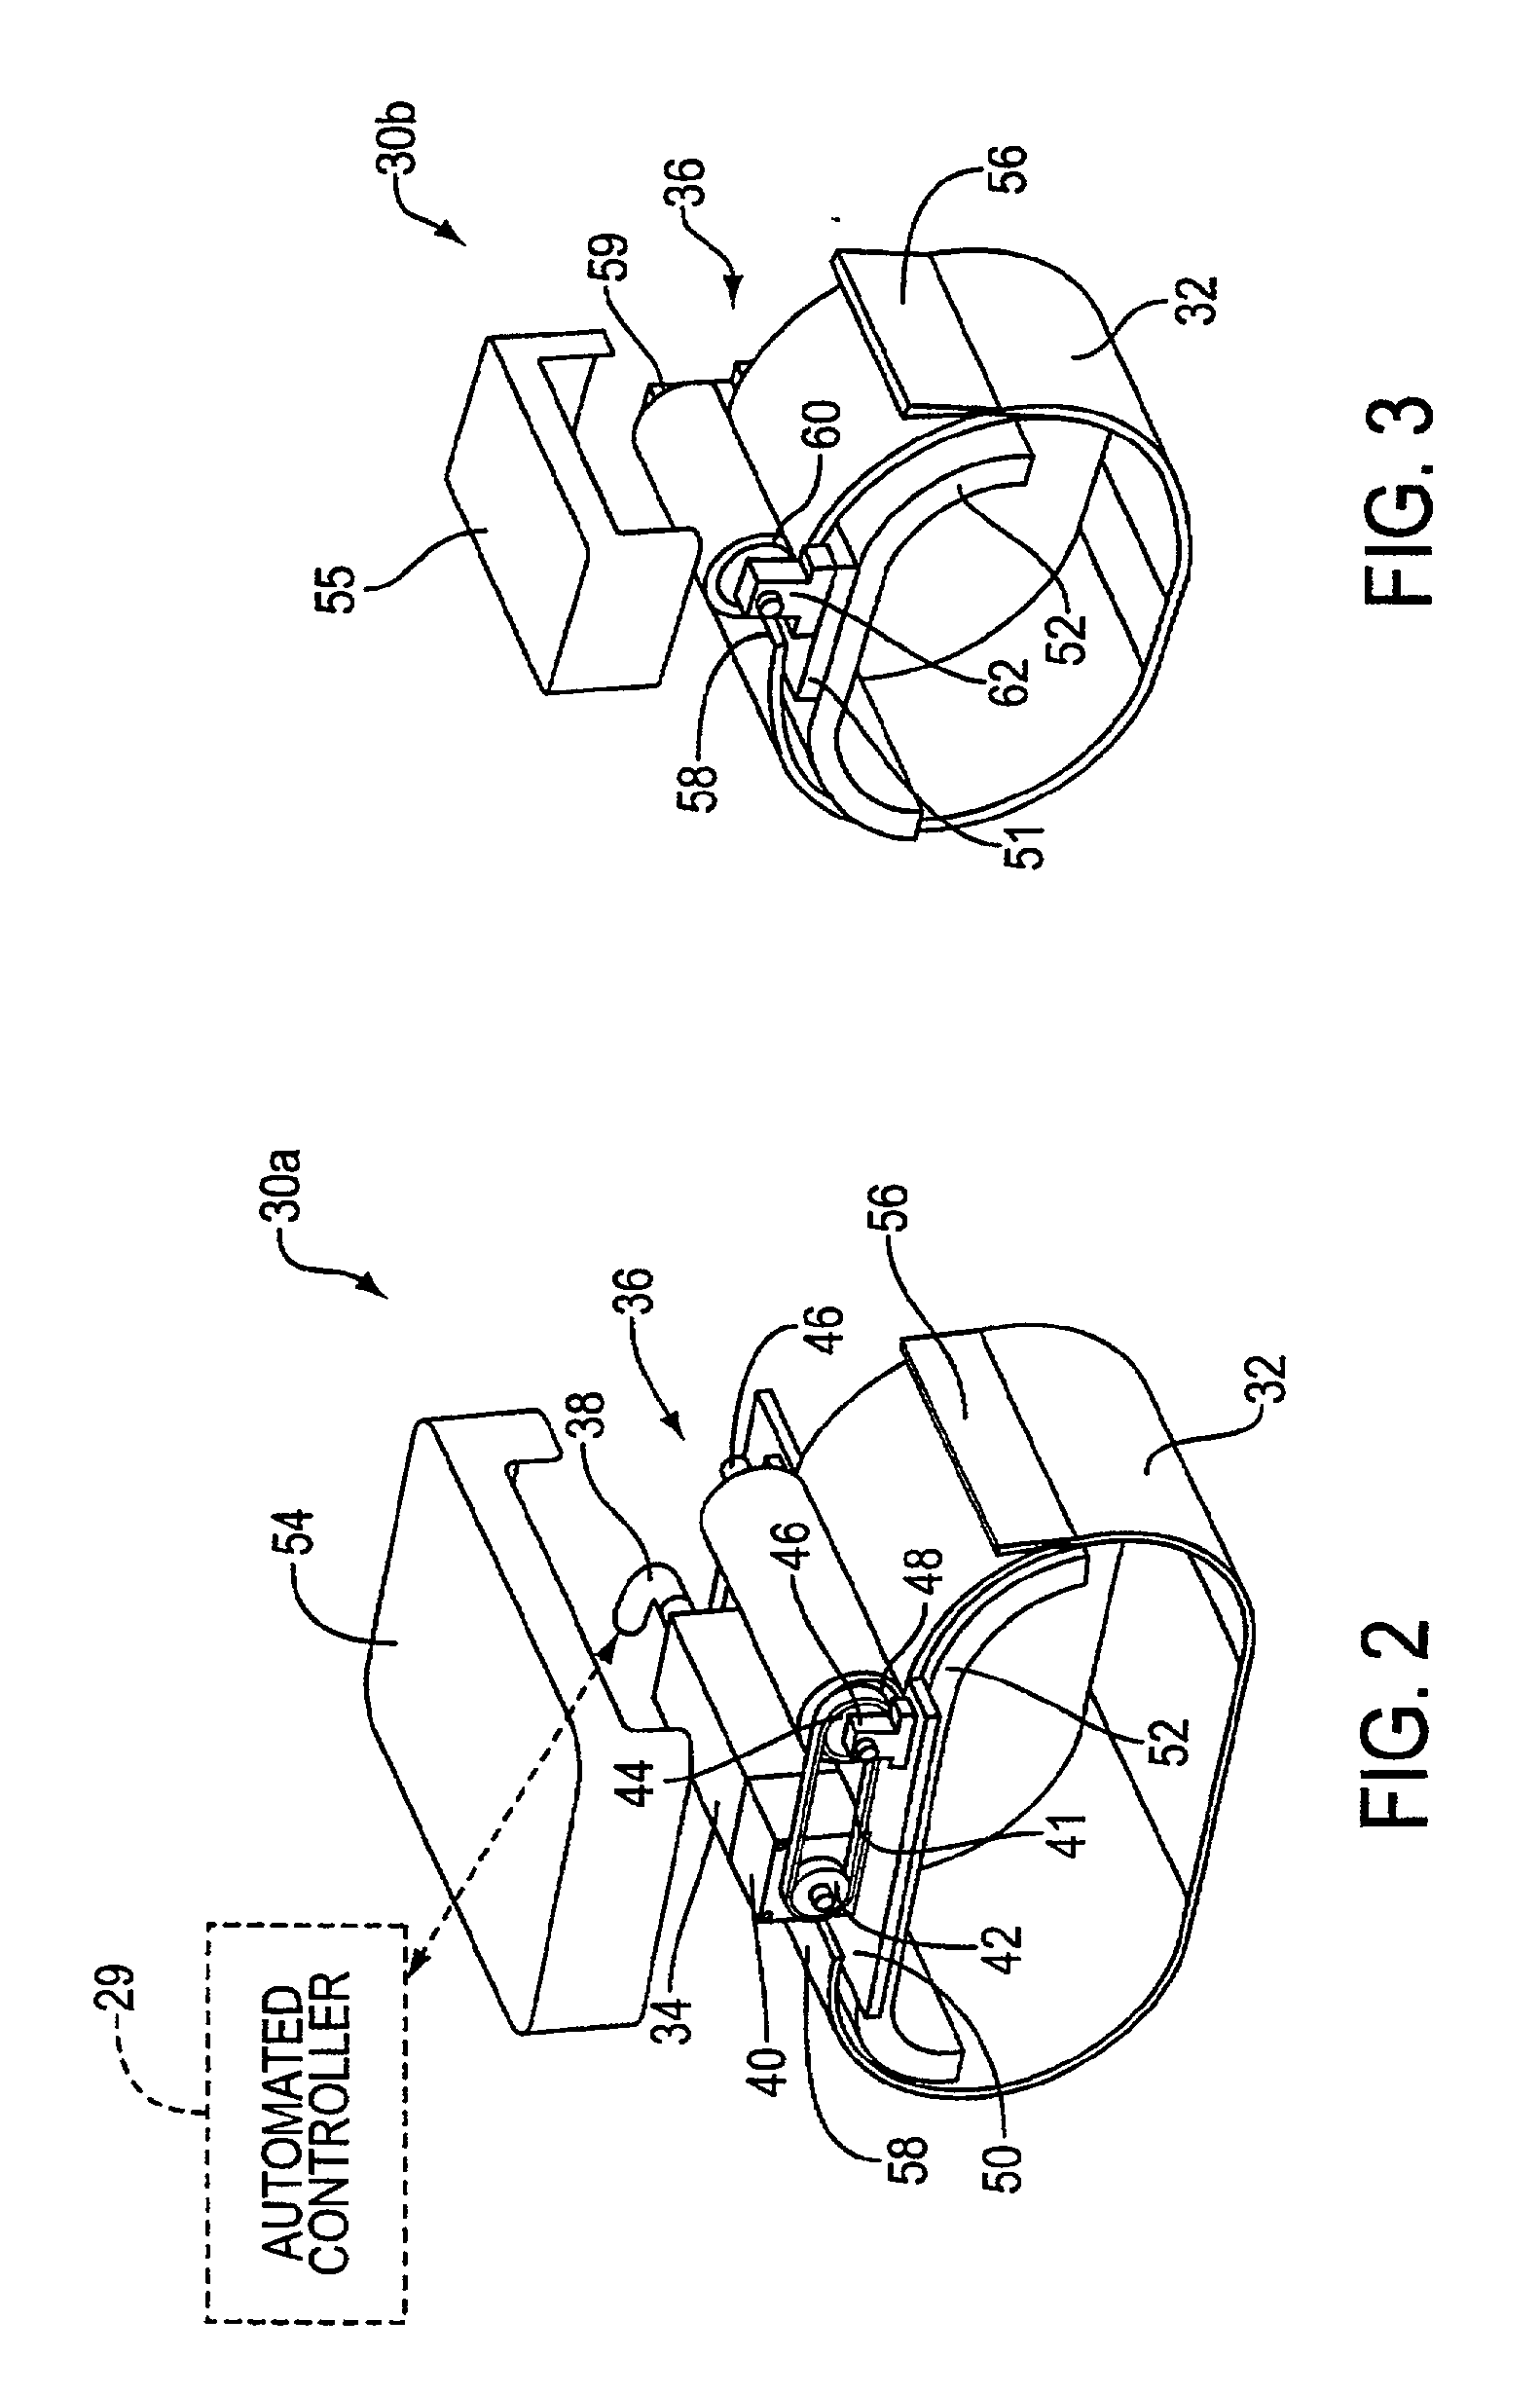 Automated chest compression apparatus